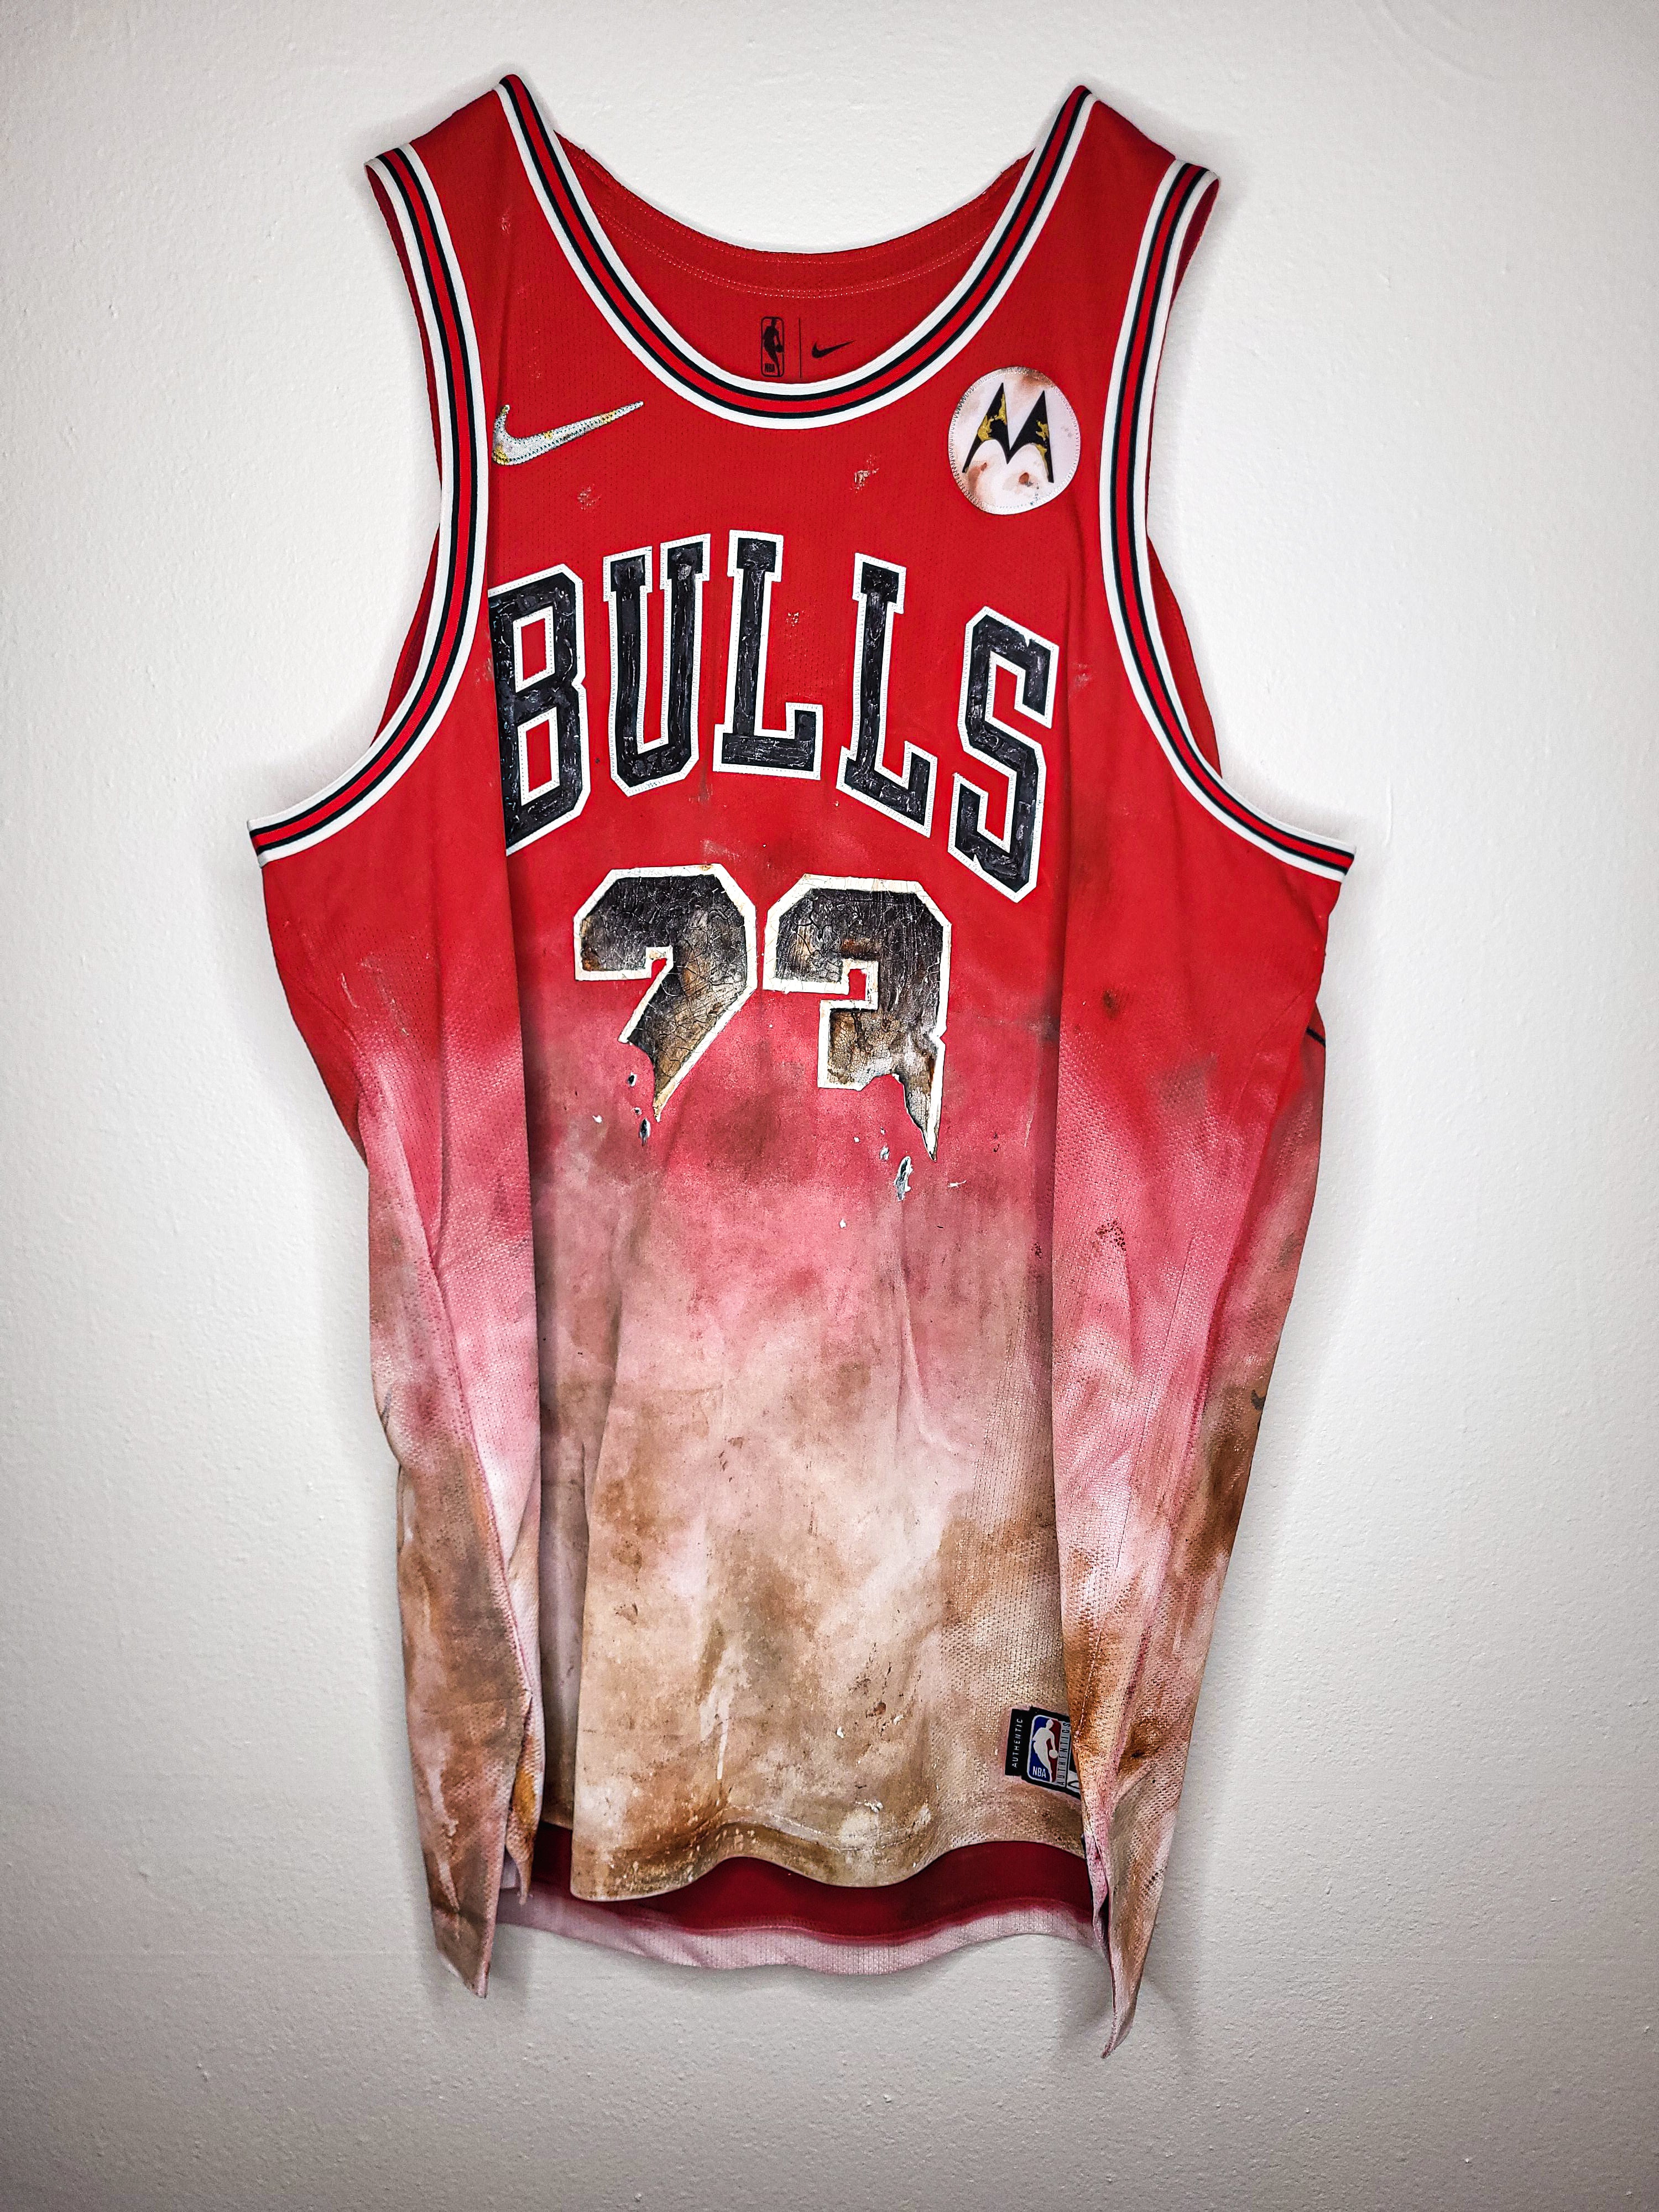 "Hall of Bulls" Jersey by Chuck Styles